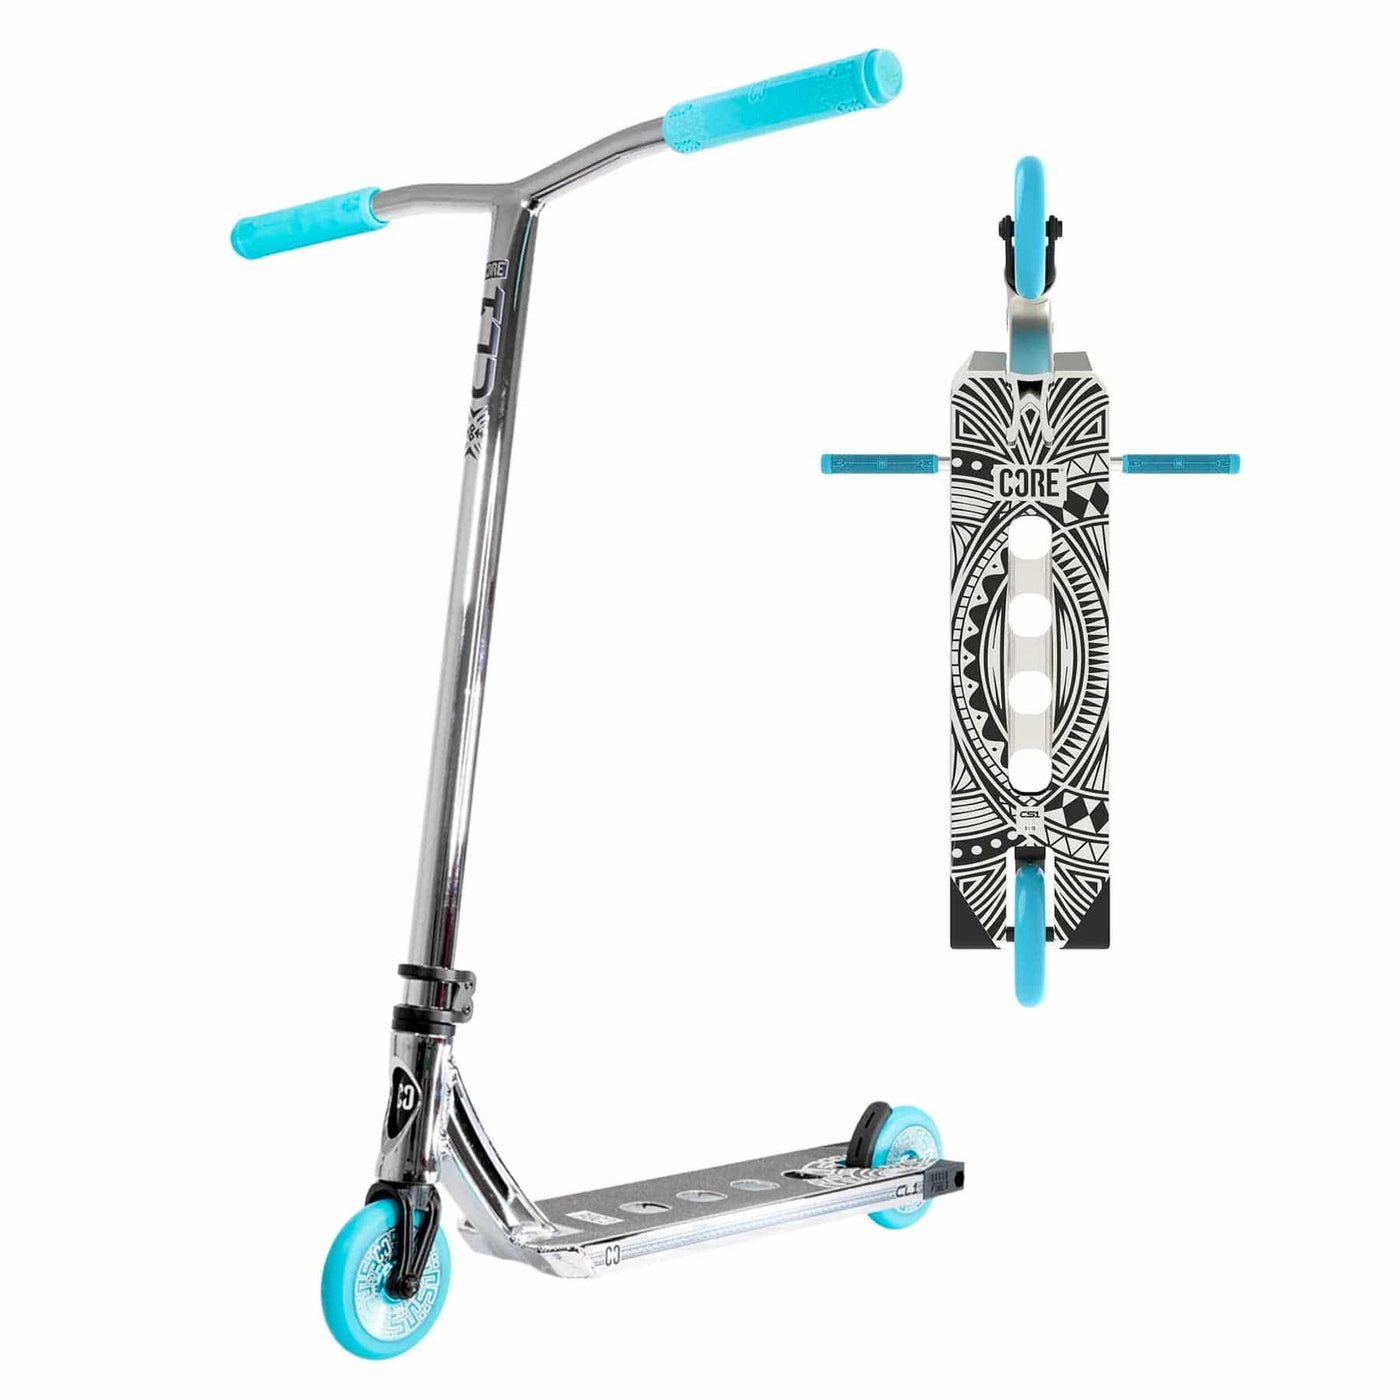 CORE CL1 Complete Stunt  Scooter Chrome & Teal I Adult Stunt Scooter